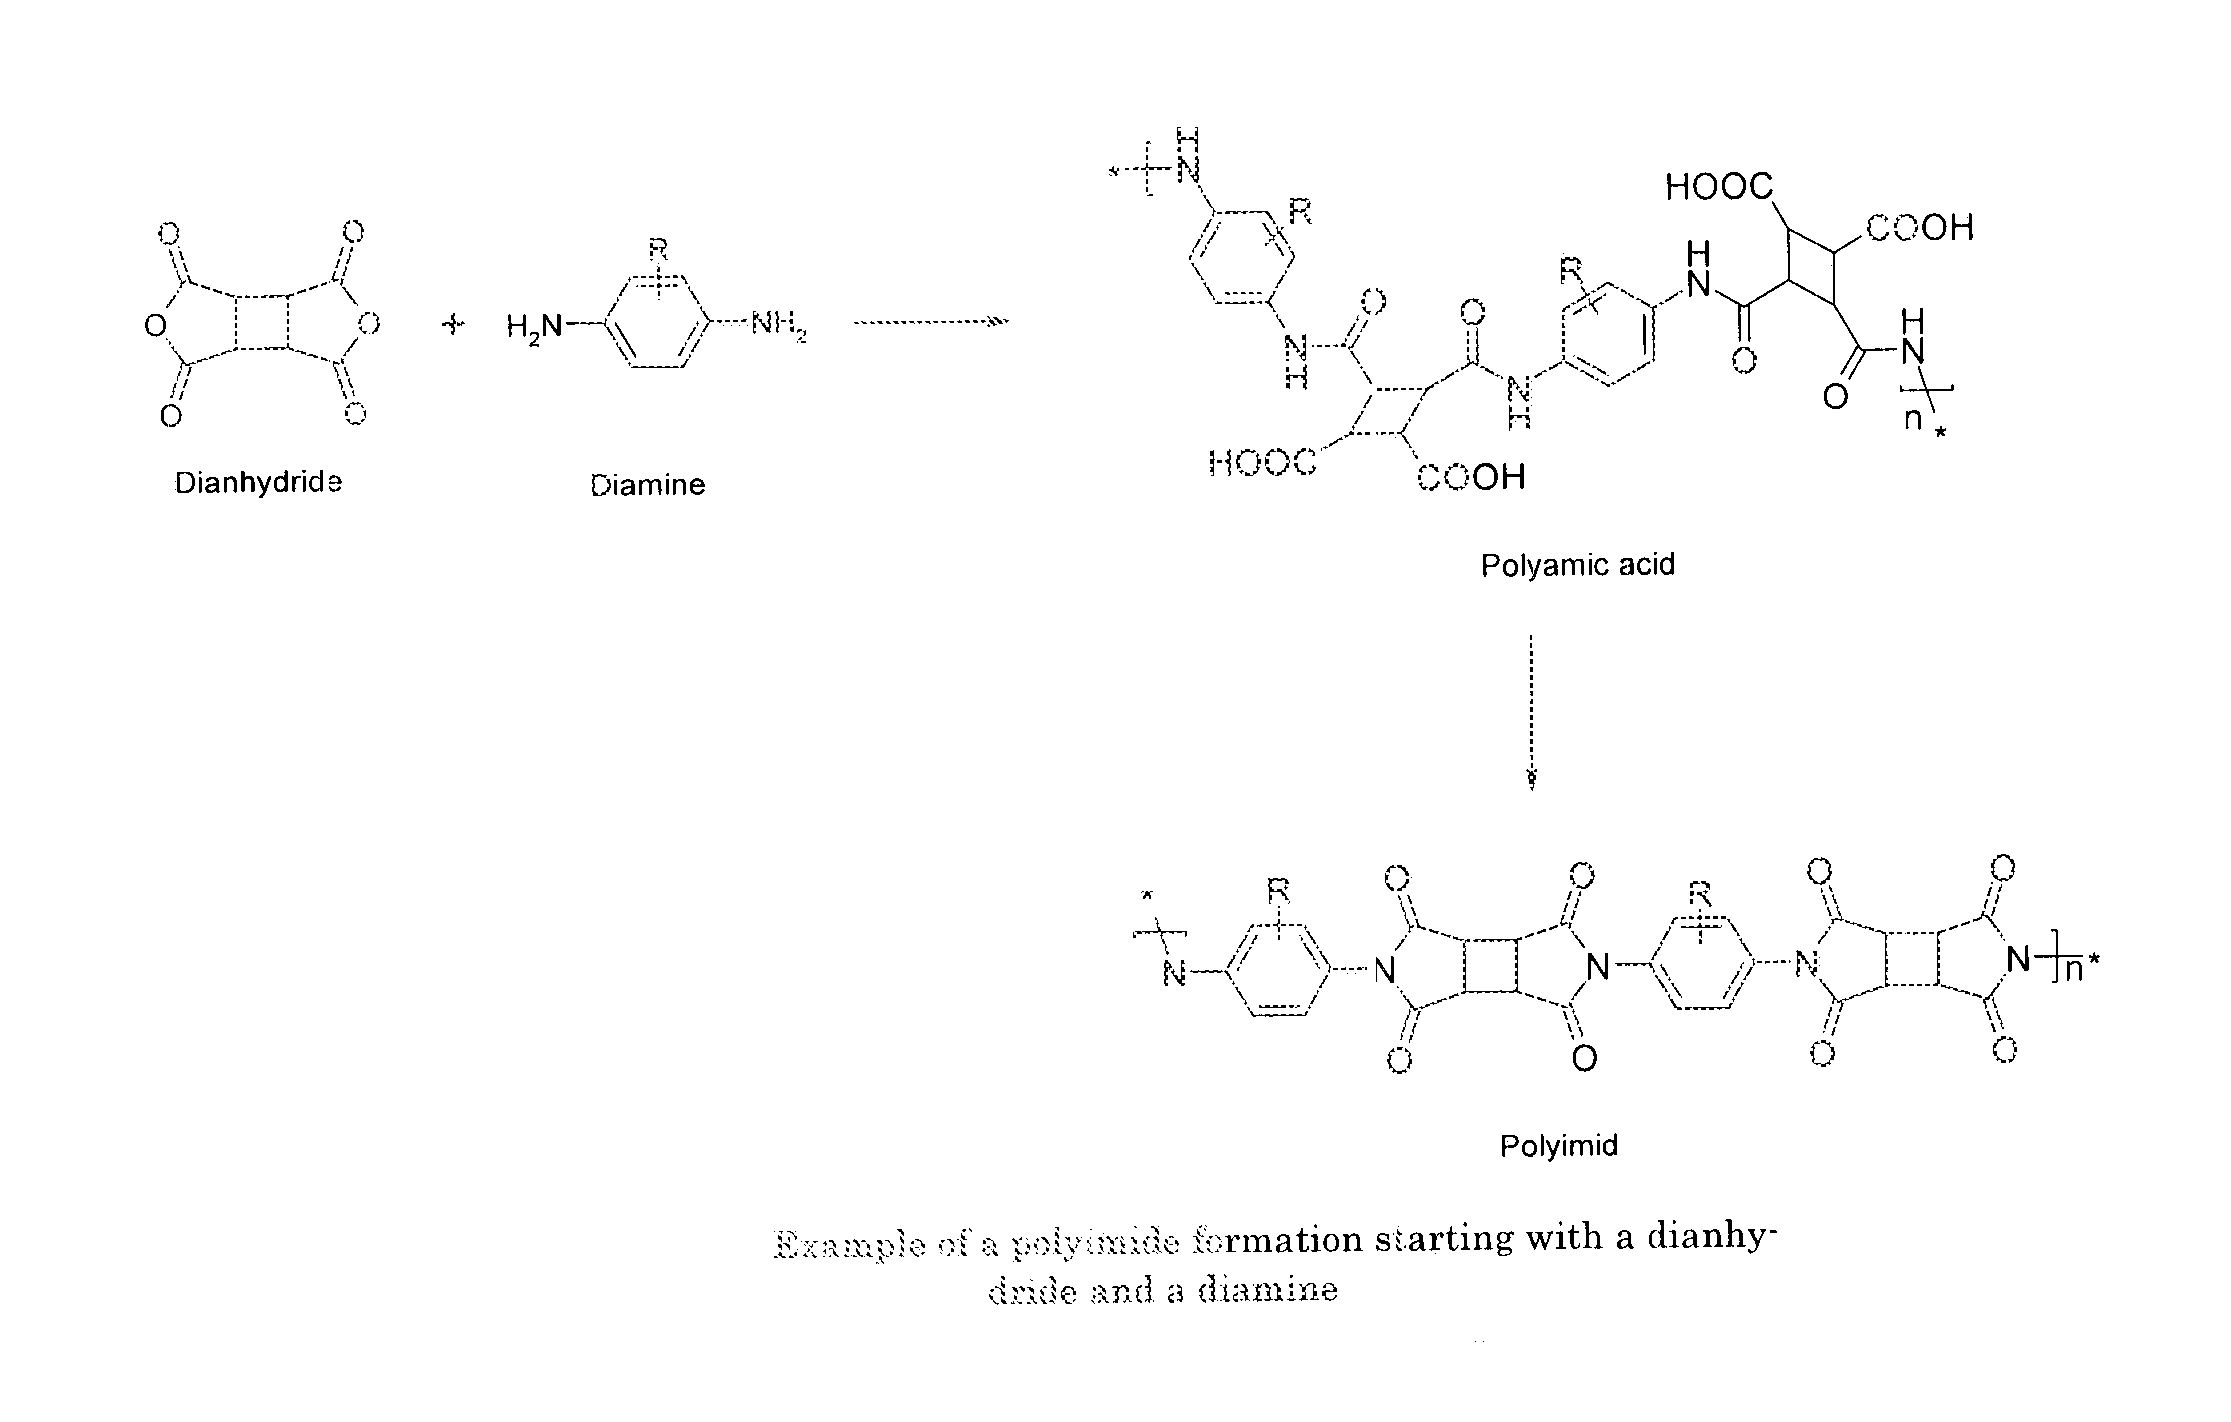 Polyamic acid and a polyimide obtained by reacting a dianhydride and a diamine